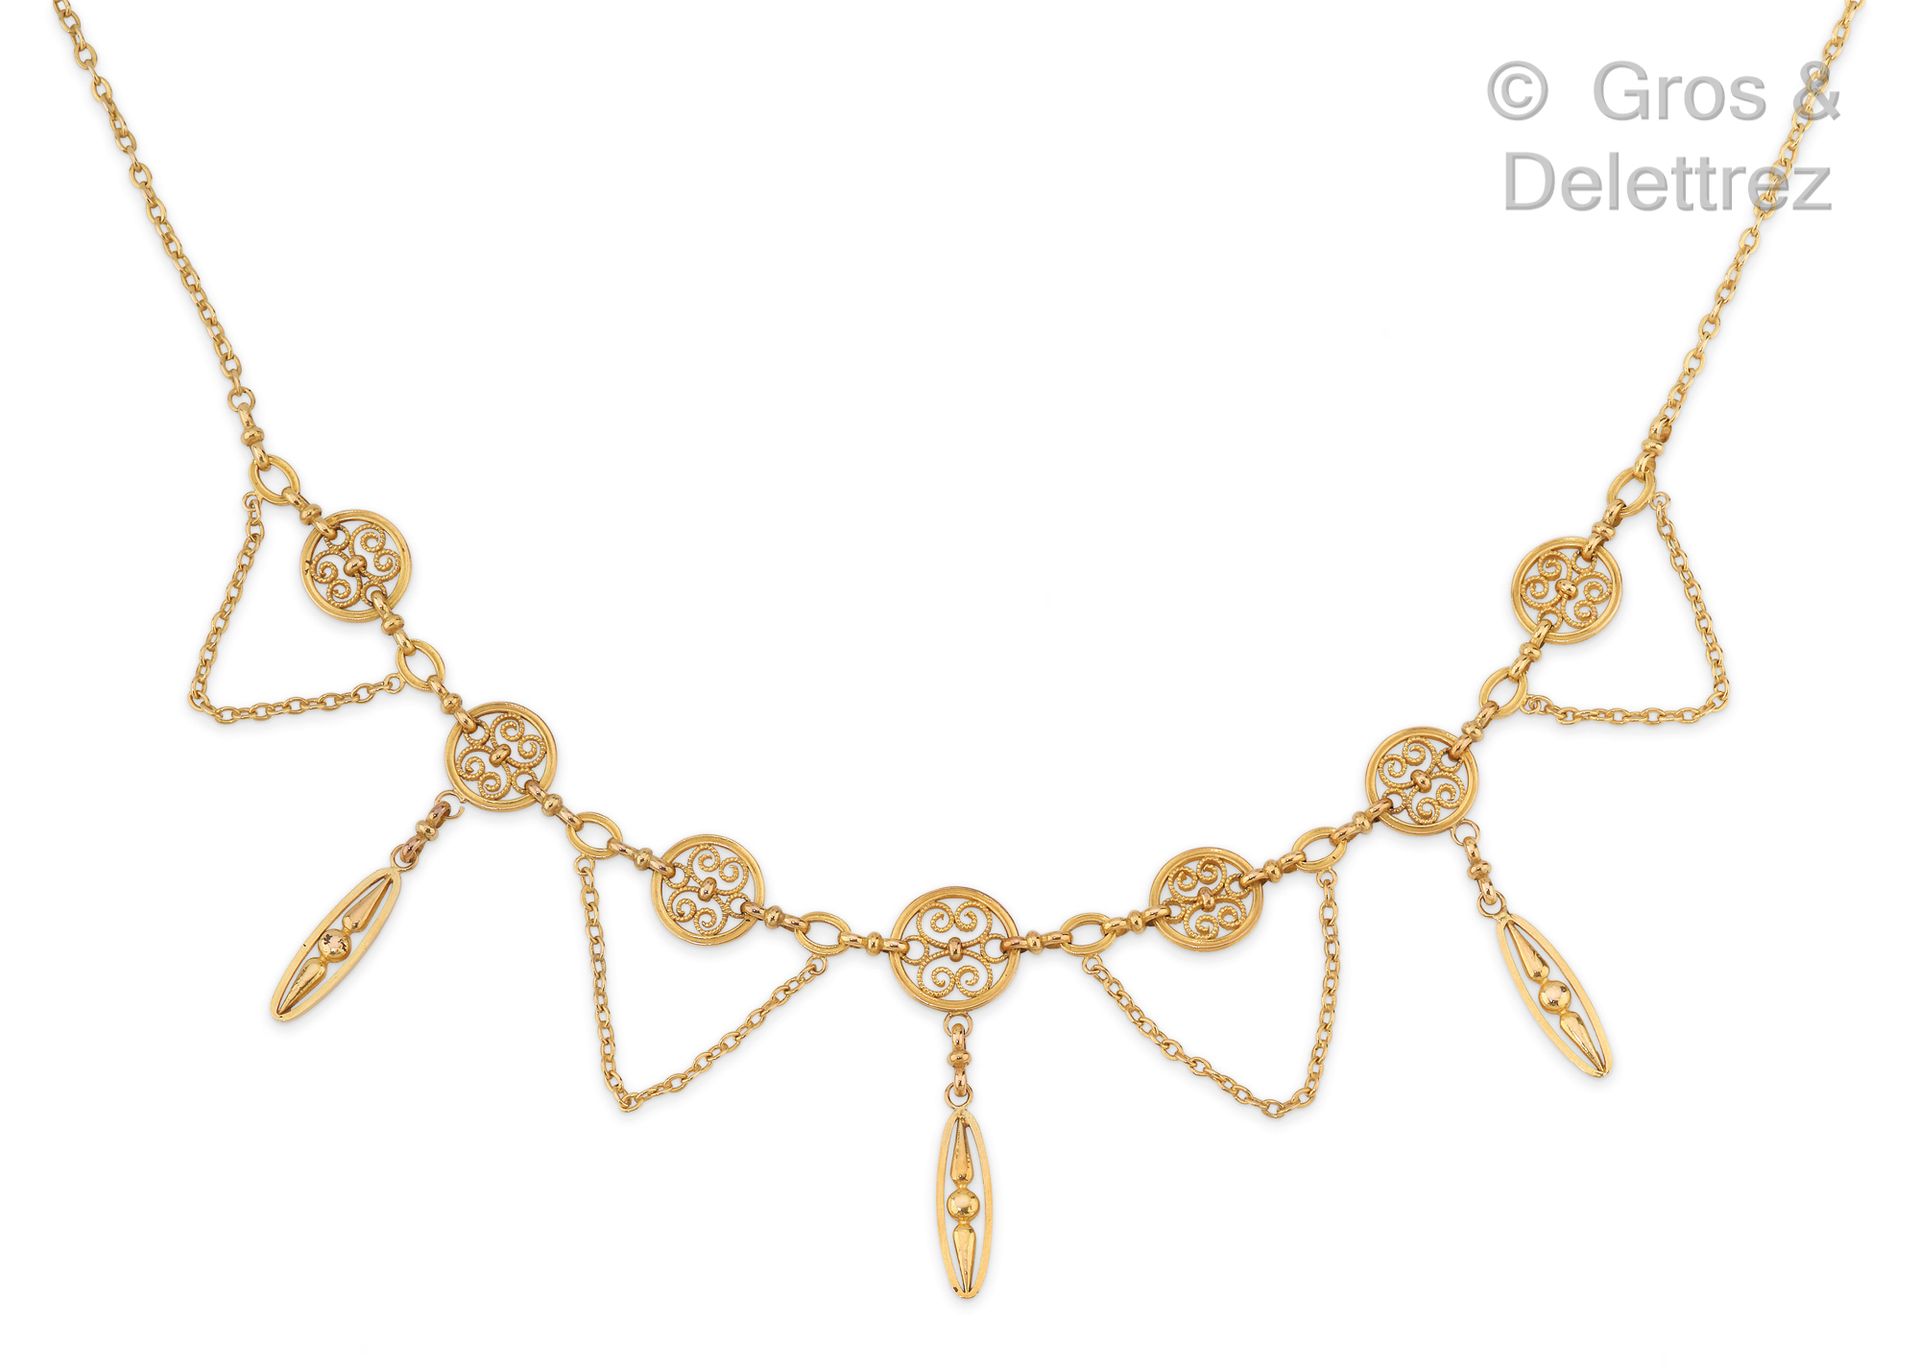 Null Necklace "Collerette" in yellow gold, composed of circular filigree pattern&hellip;